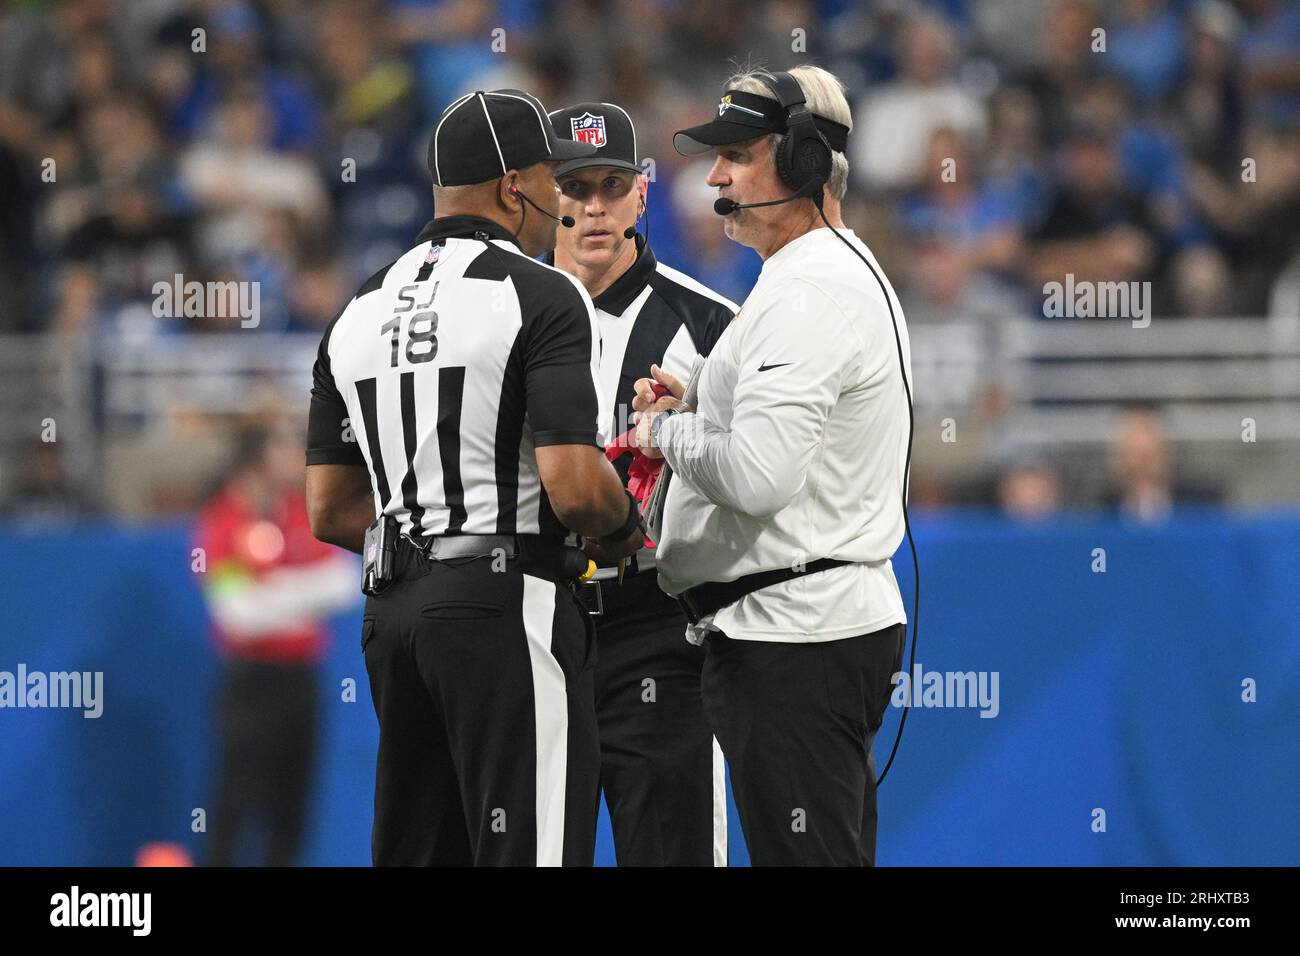 DETROIT, MI - AUGUST 19: Jacksonville Jaguars head coach Doug Pederson  talks to side judge Clay Reynard (18) during a replay review in the  exhibition game between Jacksonville Jaguars and Detroit Lions